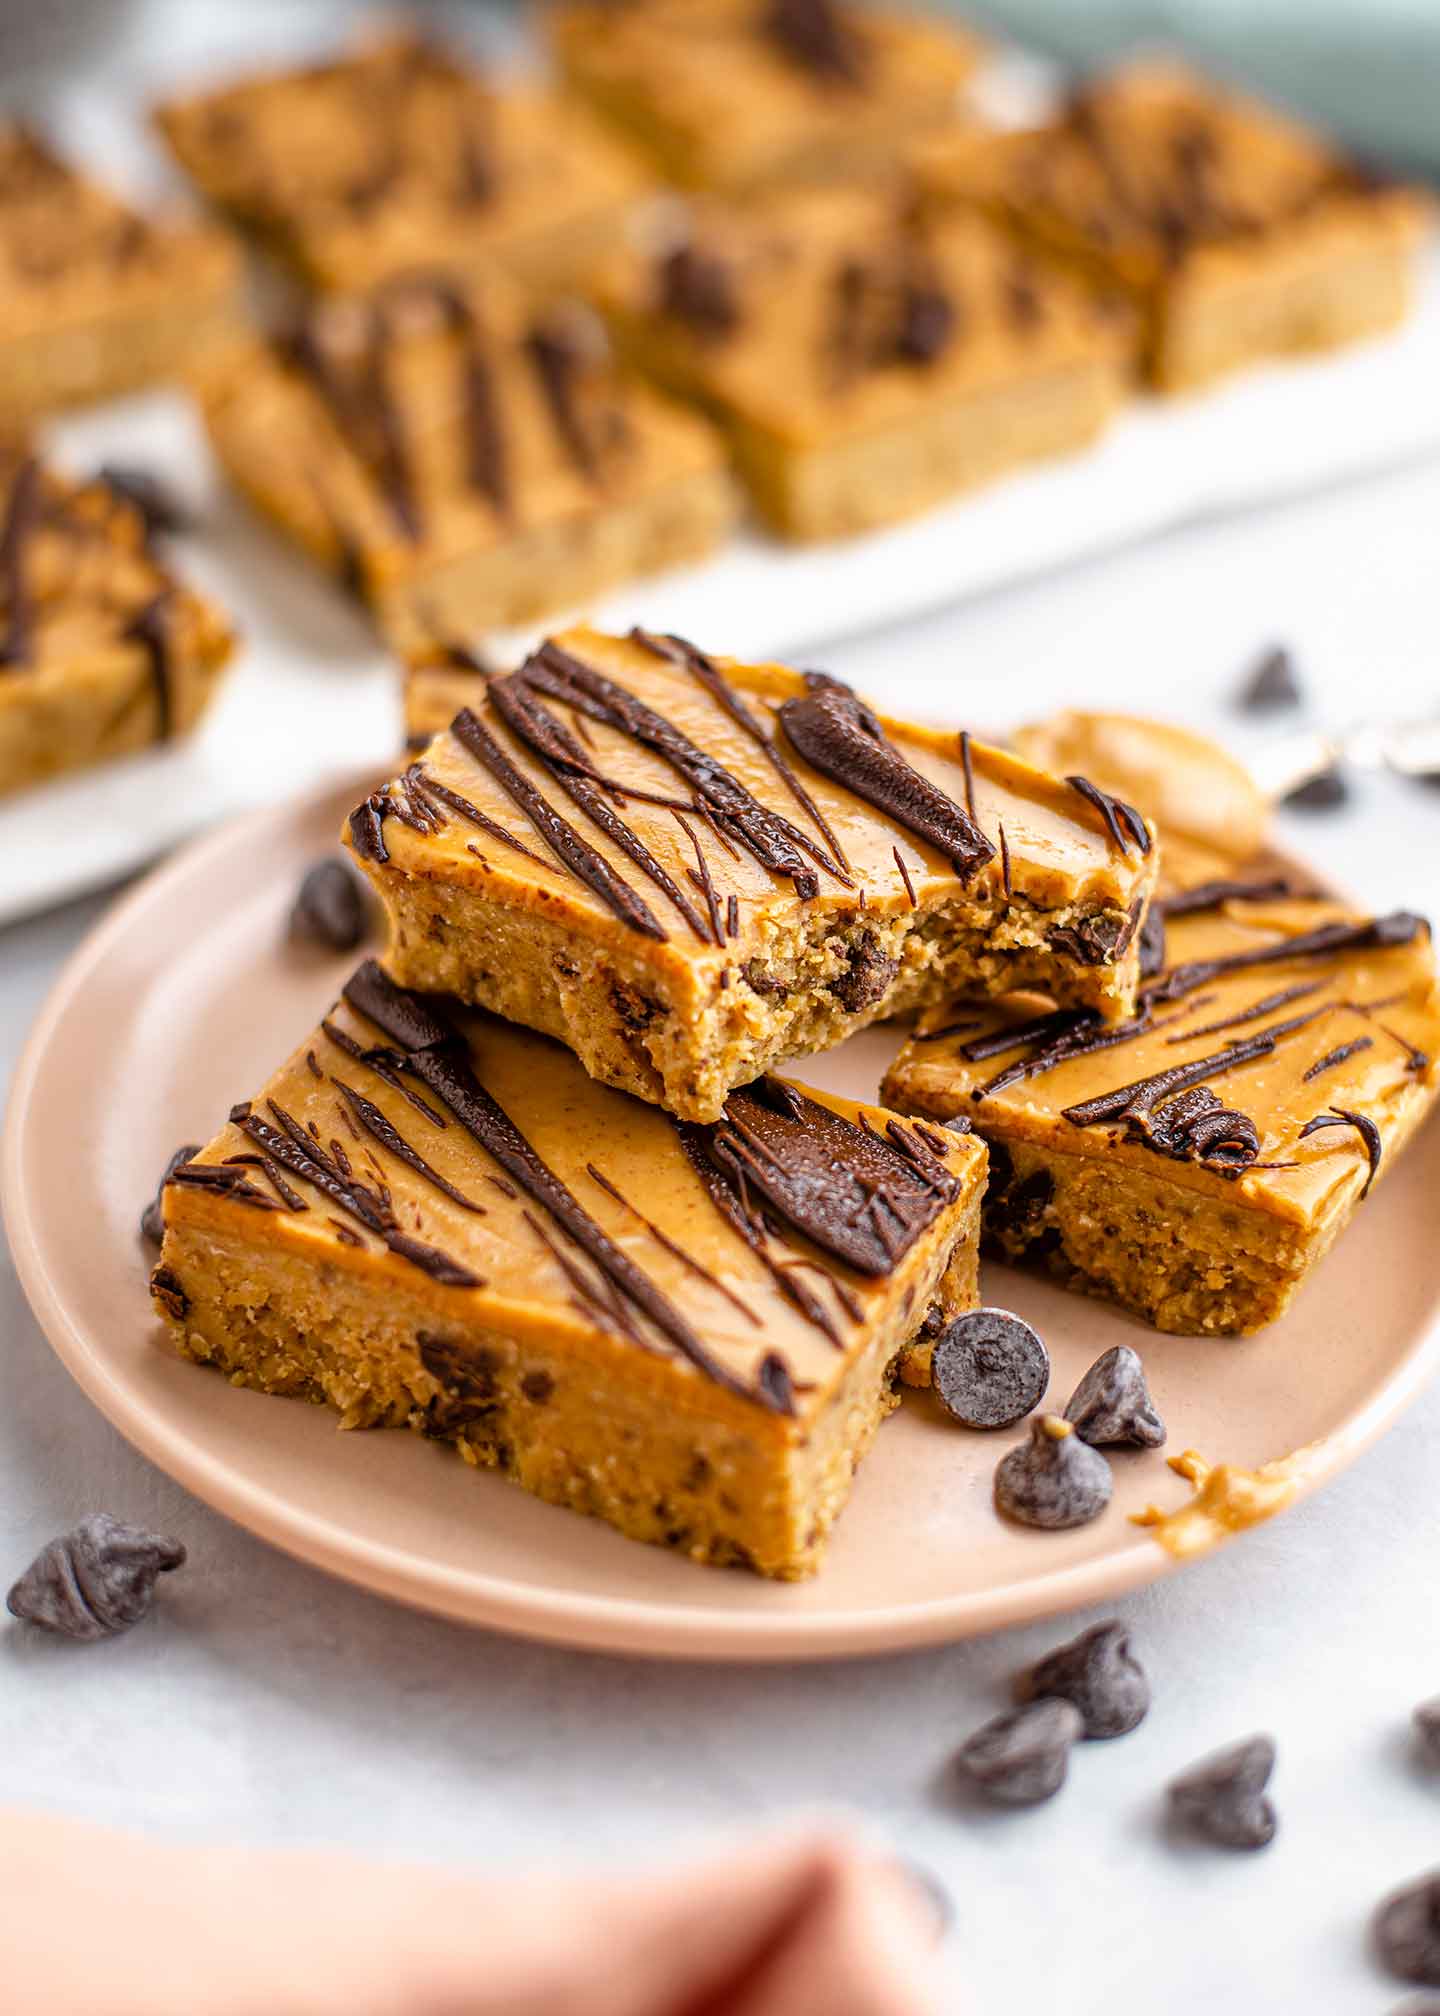 A bite is taken out of a protein cookie dough bar speckled with chocolate chips, topped with a layer of peanut butter, and drizzled with chocolate. The bar rests on a stack of other bars displayed on a plate.